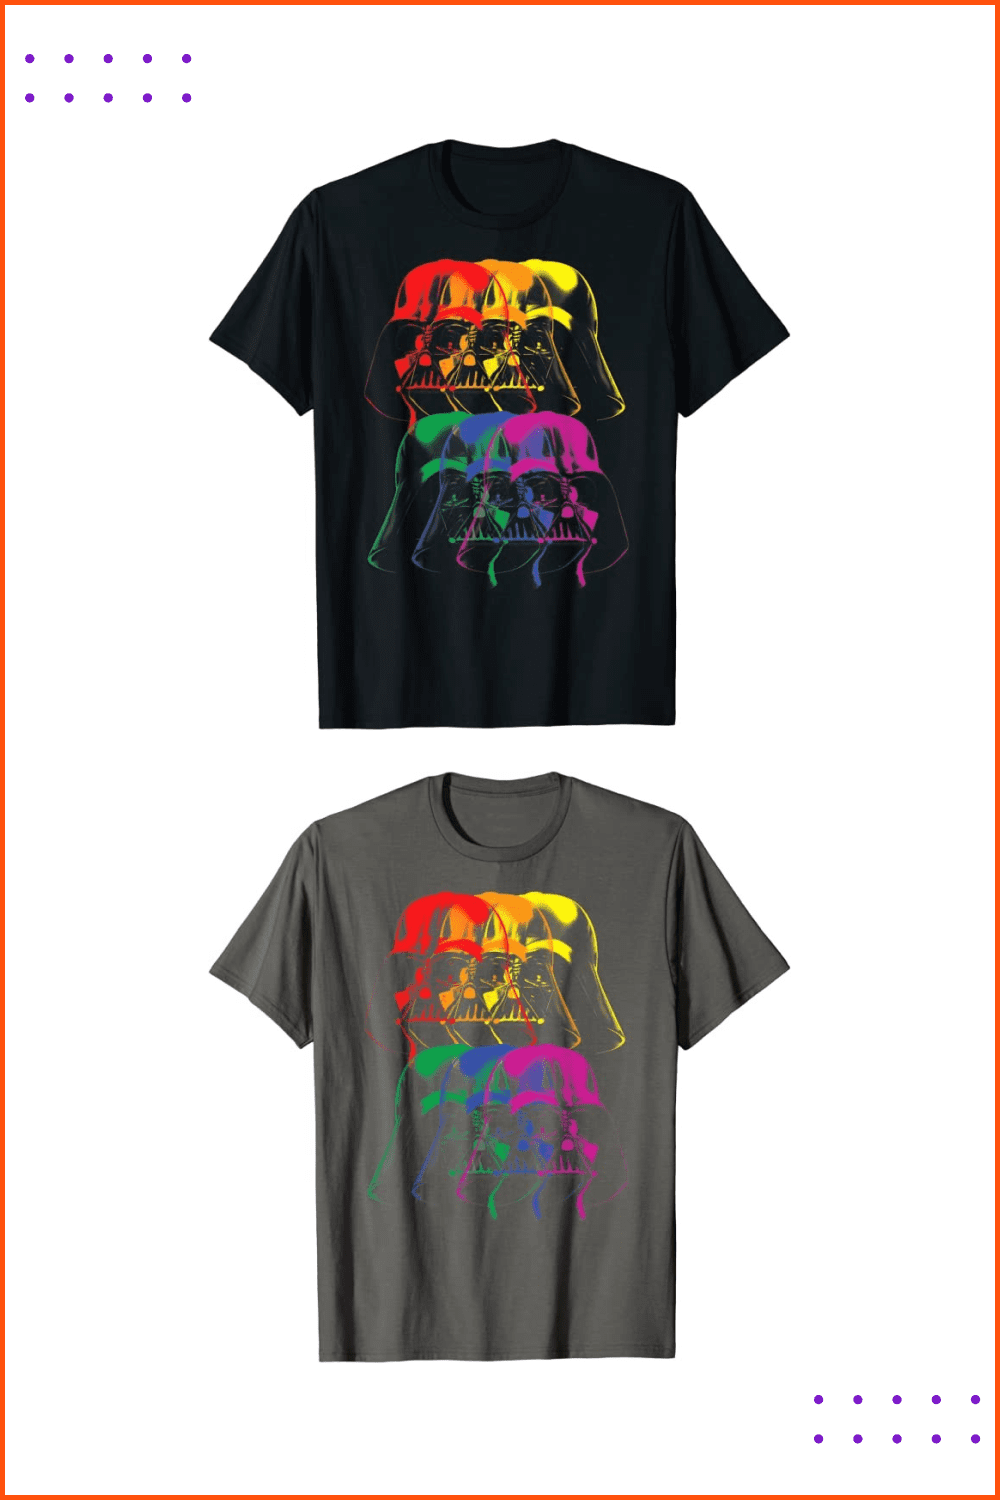 T-shirt with Darth Vader helmet in rainbow colors.